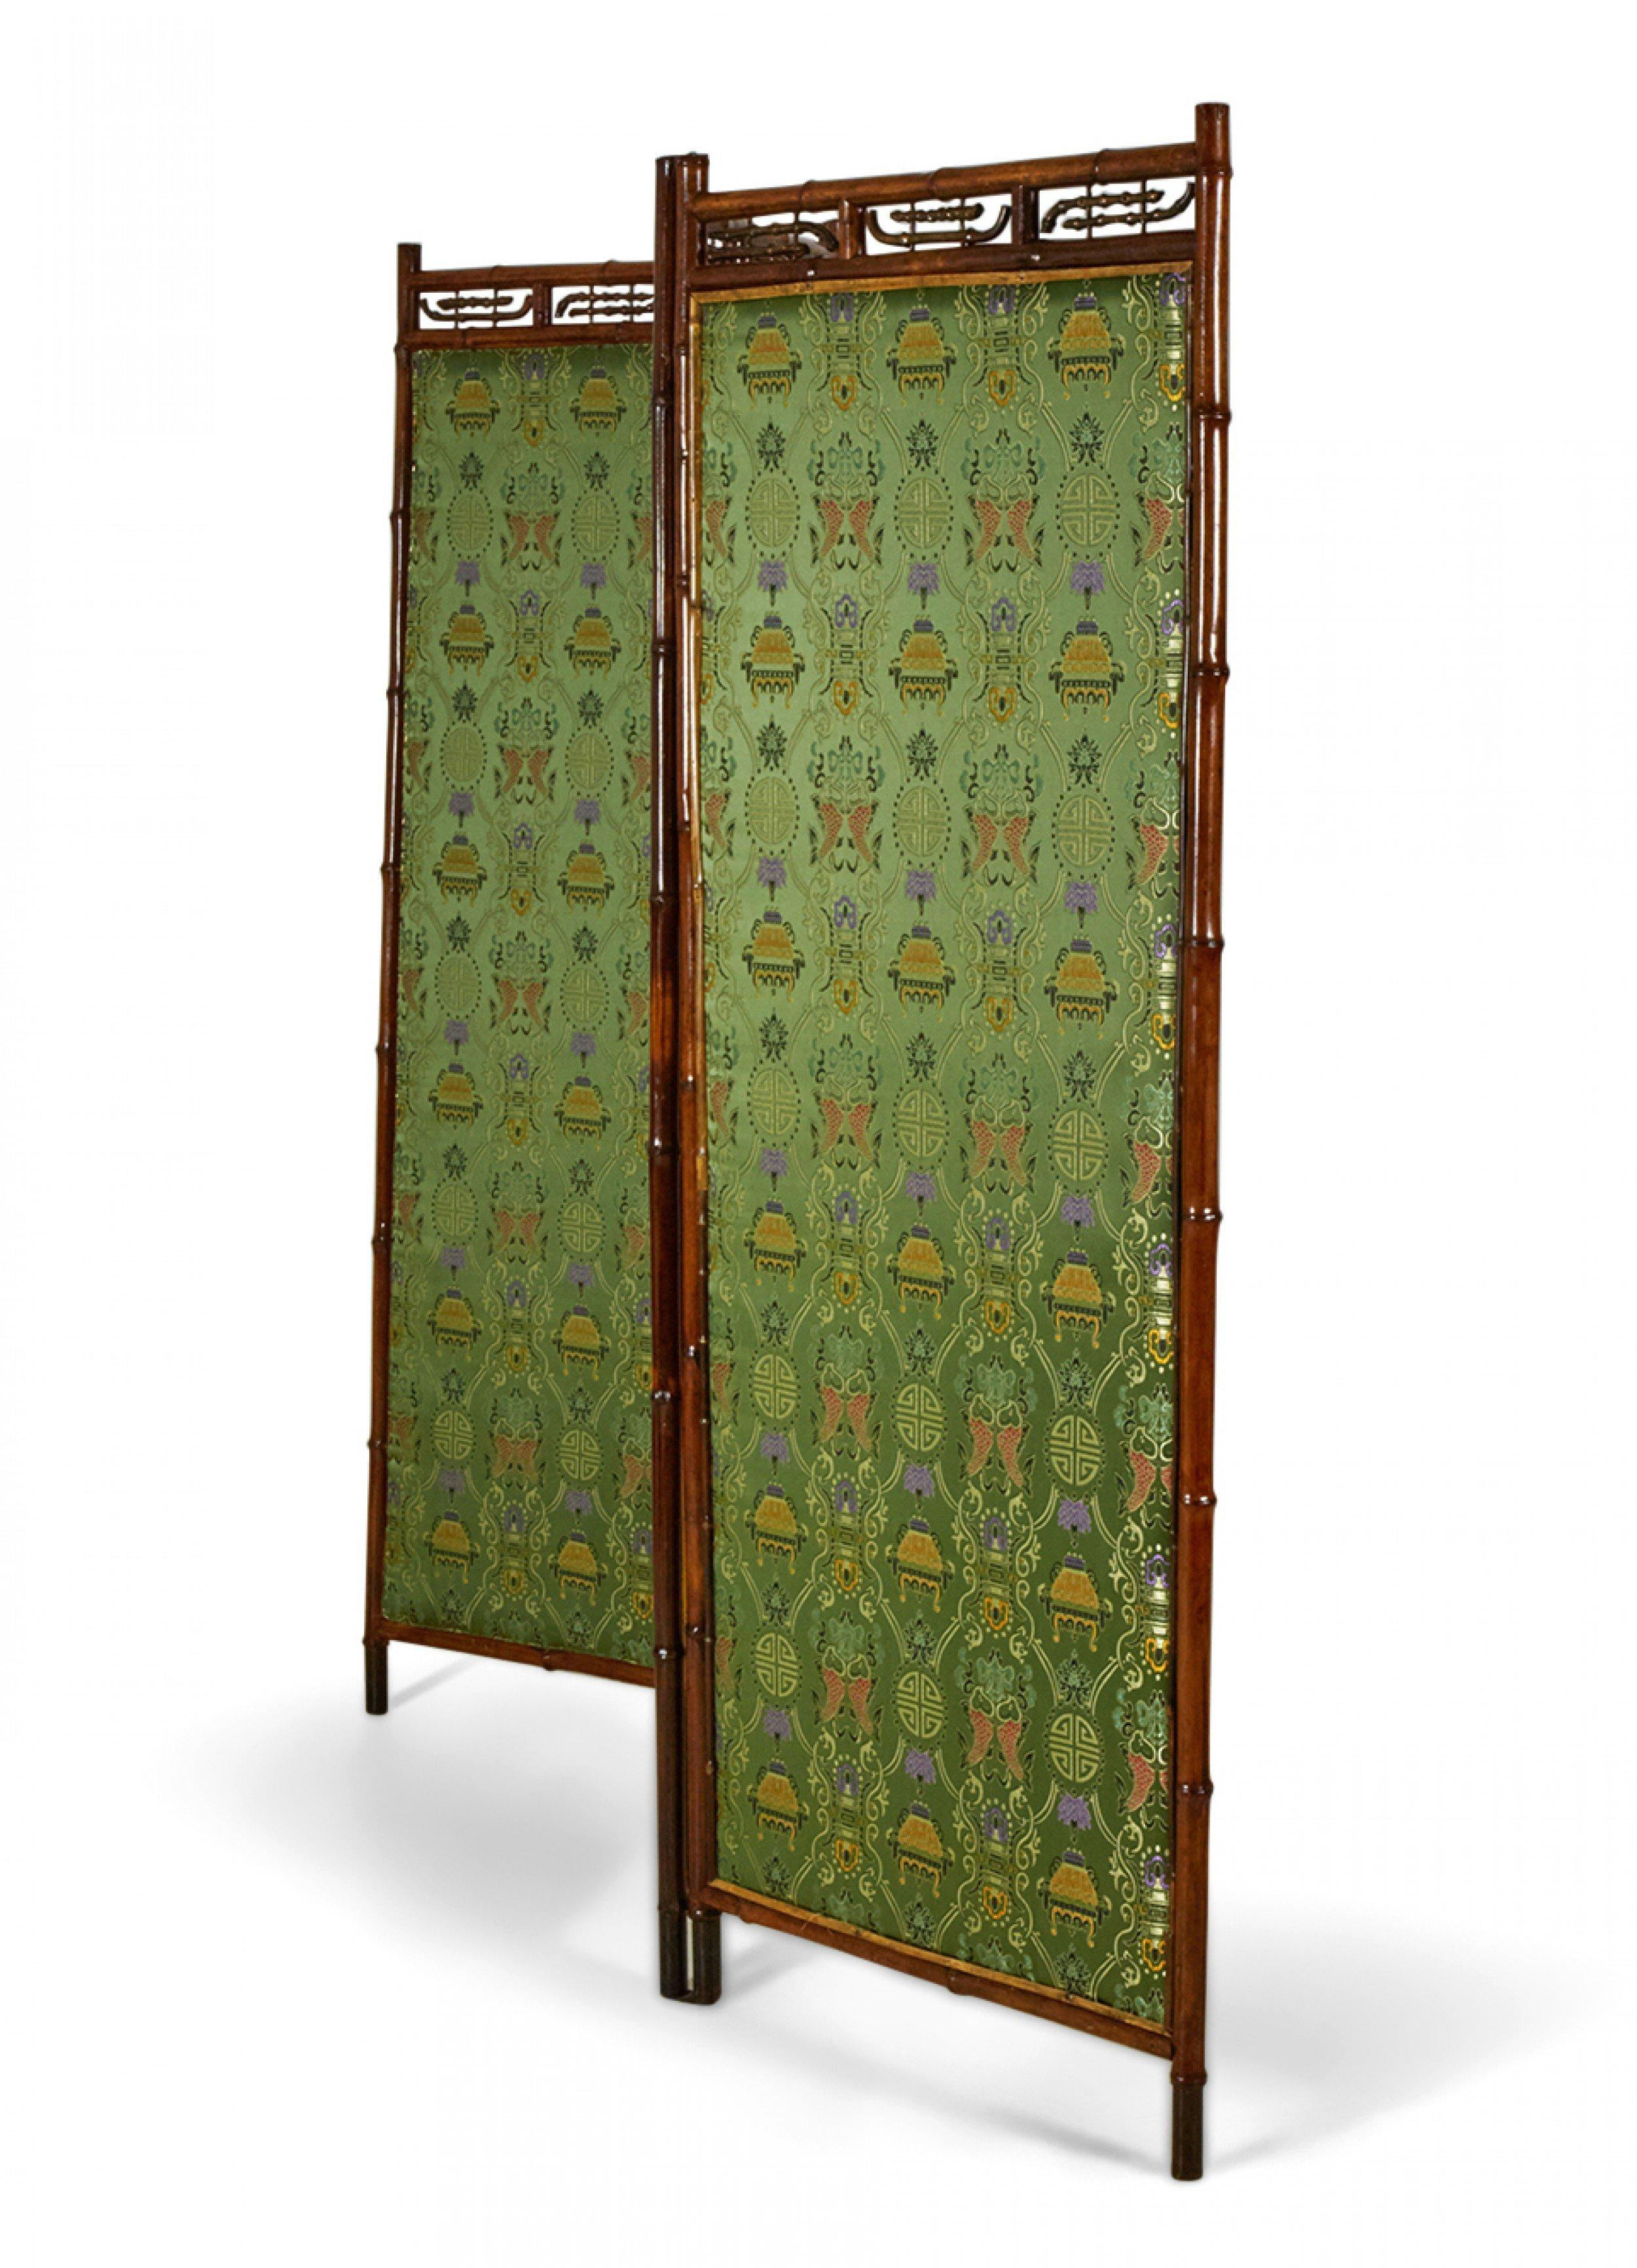 English Victorian bamboo 3 fold screen with Chinese patterned silk panels, one side in yellow, one side in green, and a filigree top border.
   